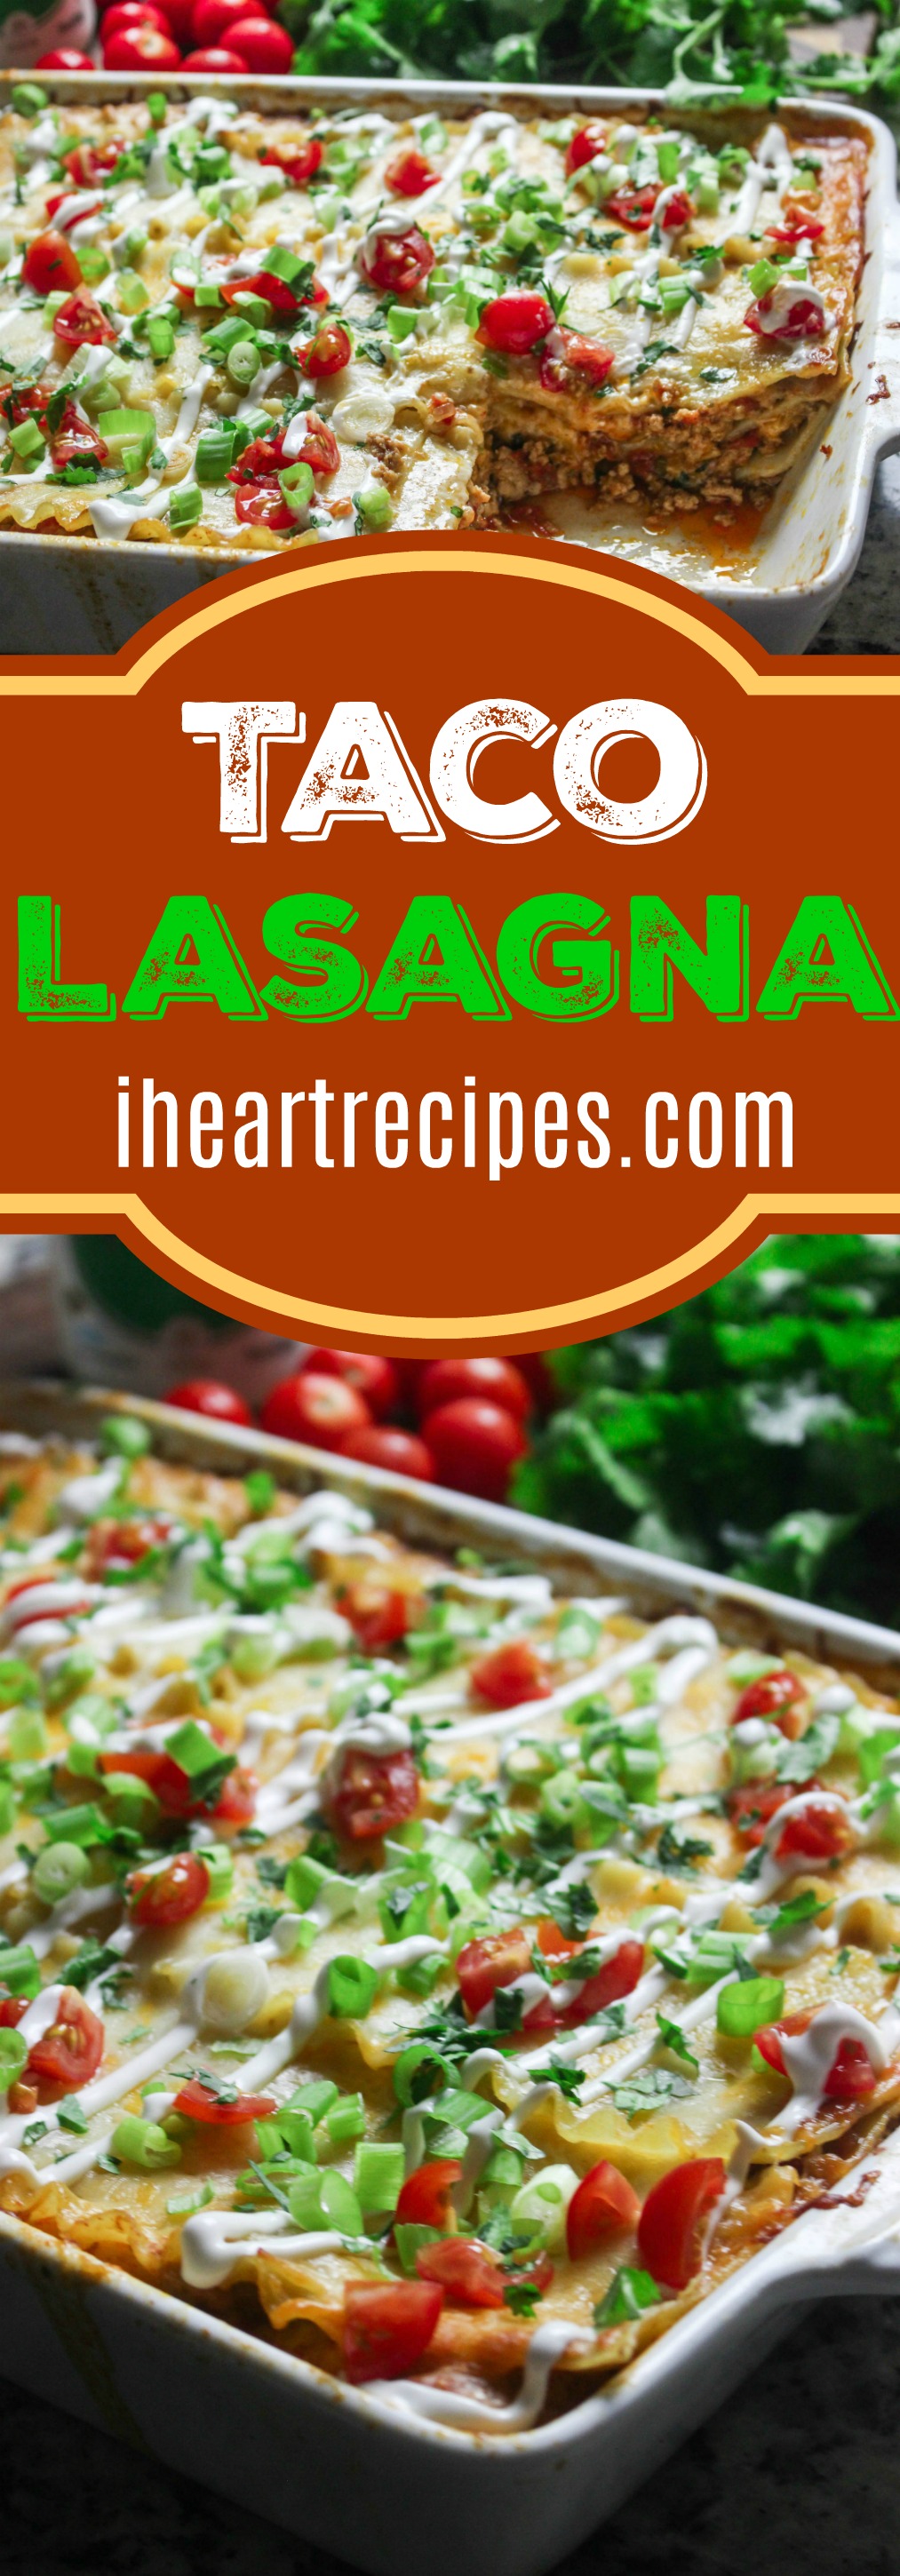 Two stacked images of a casserole dish of taco lasagna, topped with tomatoes, onions, and sour cream. Image text reads “taco lasagna, iheartrecipes.com” in white and green text over a red banner.